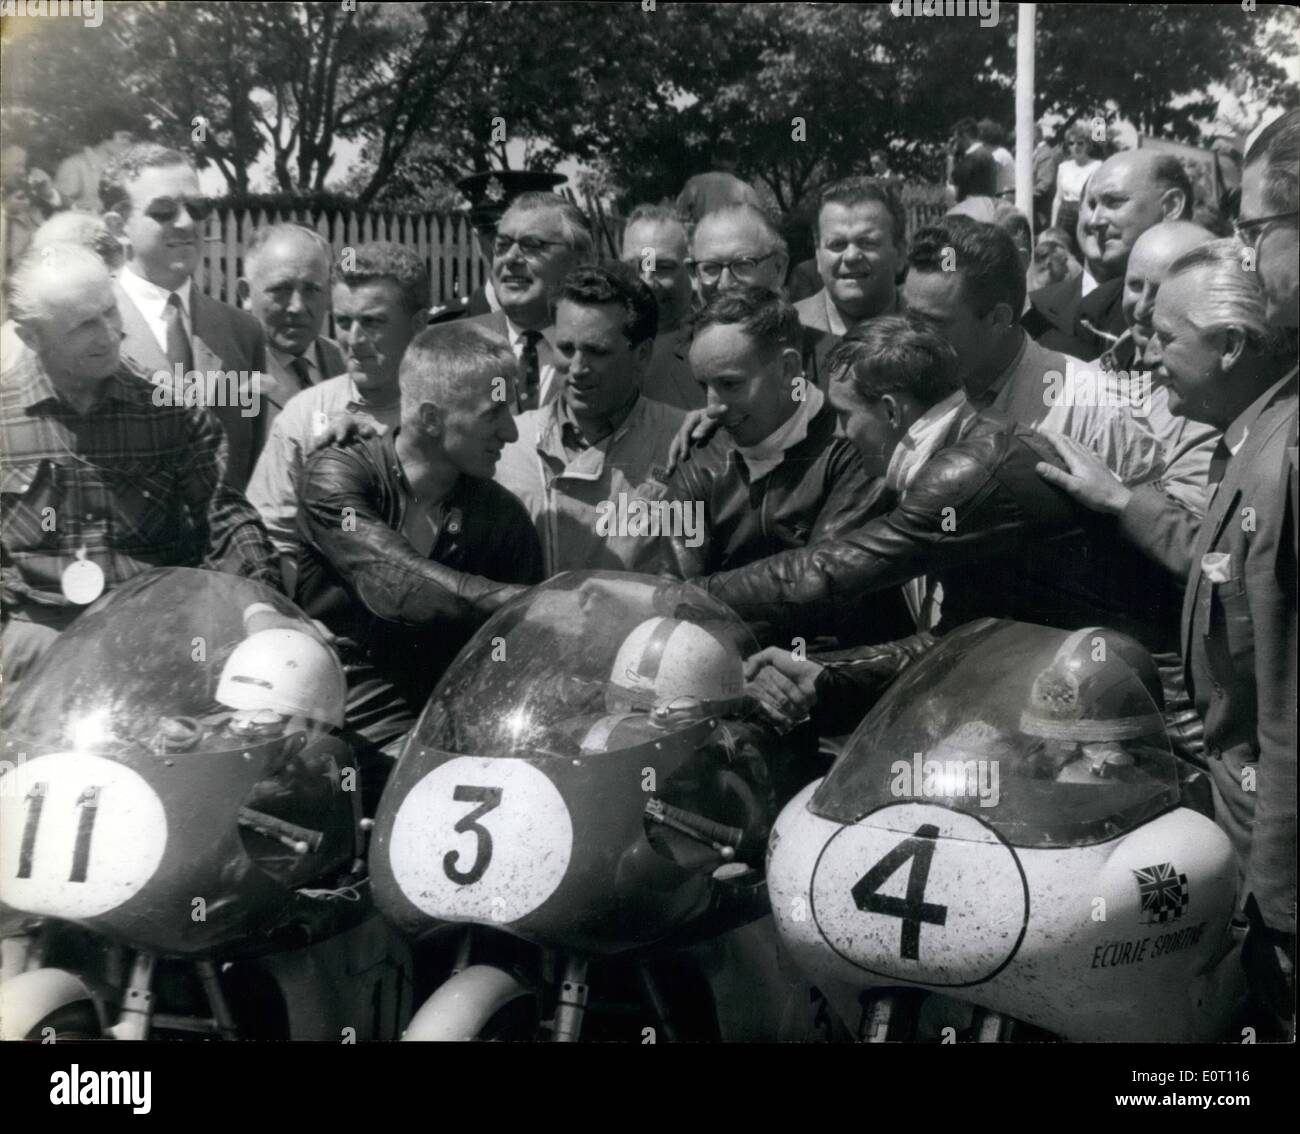 Jun. 06, 1960 - John Surtees wins Senior T.T. On the Isle of Man - Smashes all race records.: John Sureees won the Senior T.T. on his four cylinder M.V. Augusta - on the Isle of Man - smashing all race records - with the fantastic speed of 102.44 m.p.h.. He has now won the race four times - equaling the record of Stanley Woods of pre war years. He is the first man to win the race three times in succession. he never lapped at less than 100 m.p.h Stock Photo